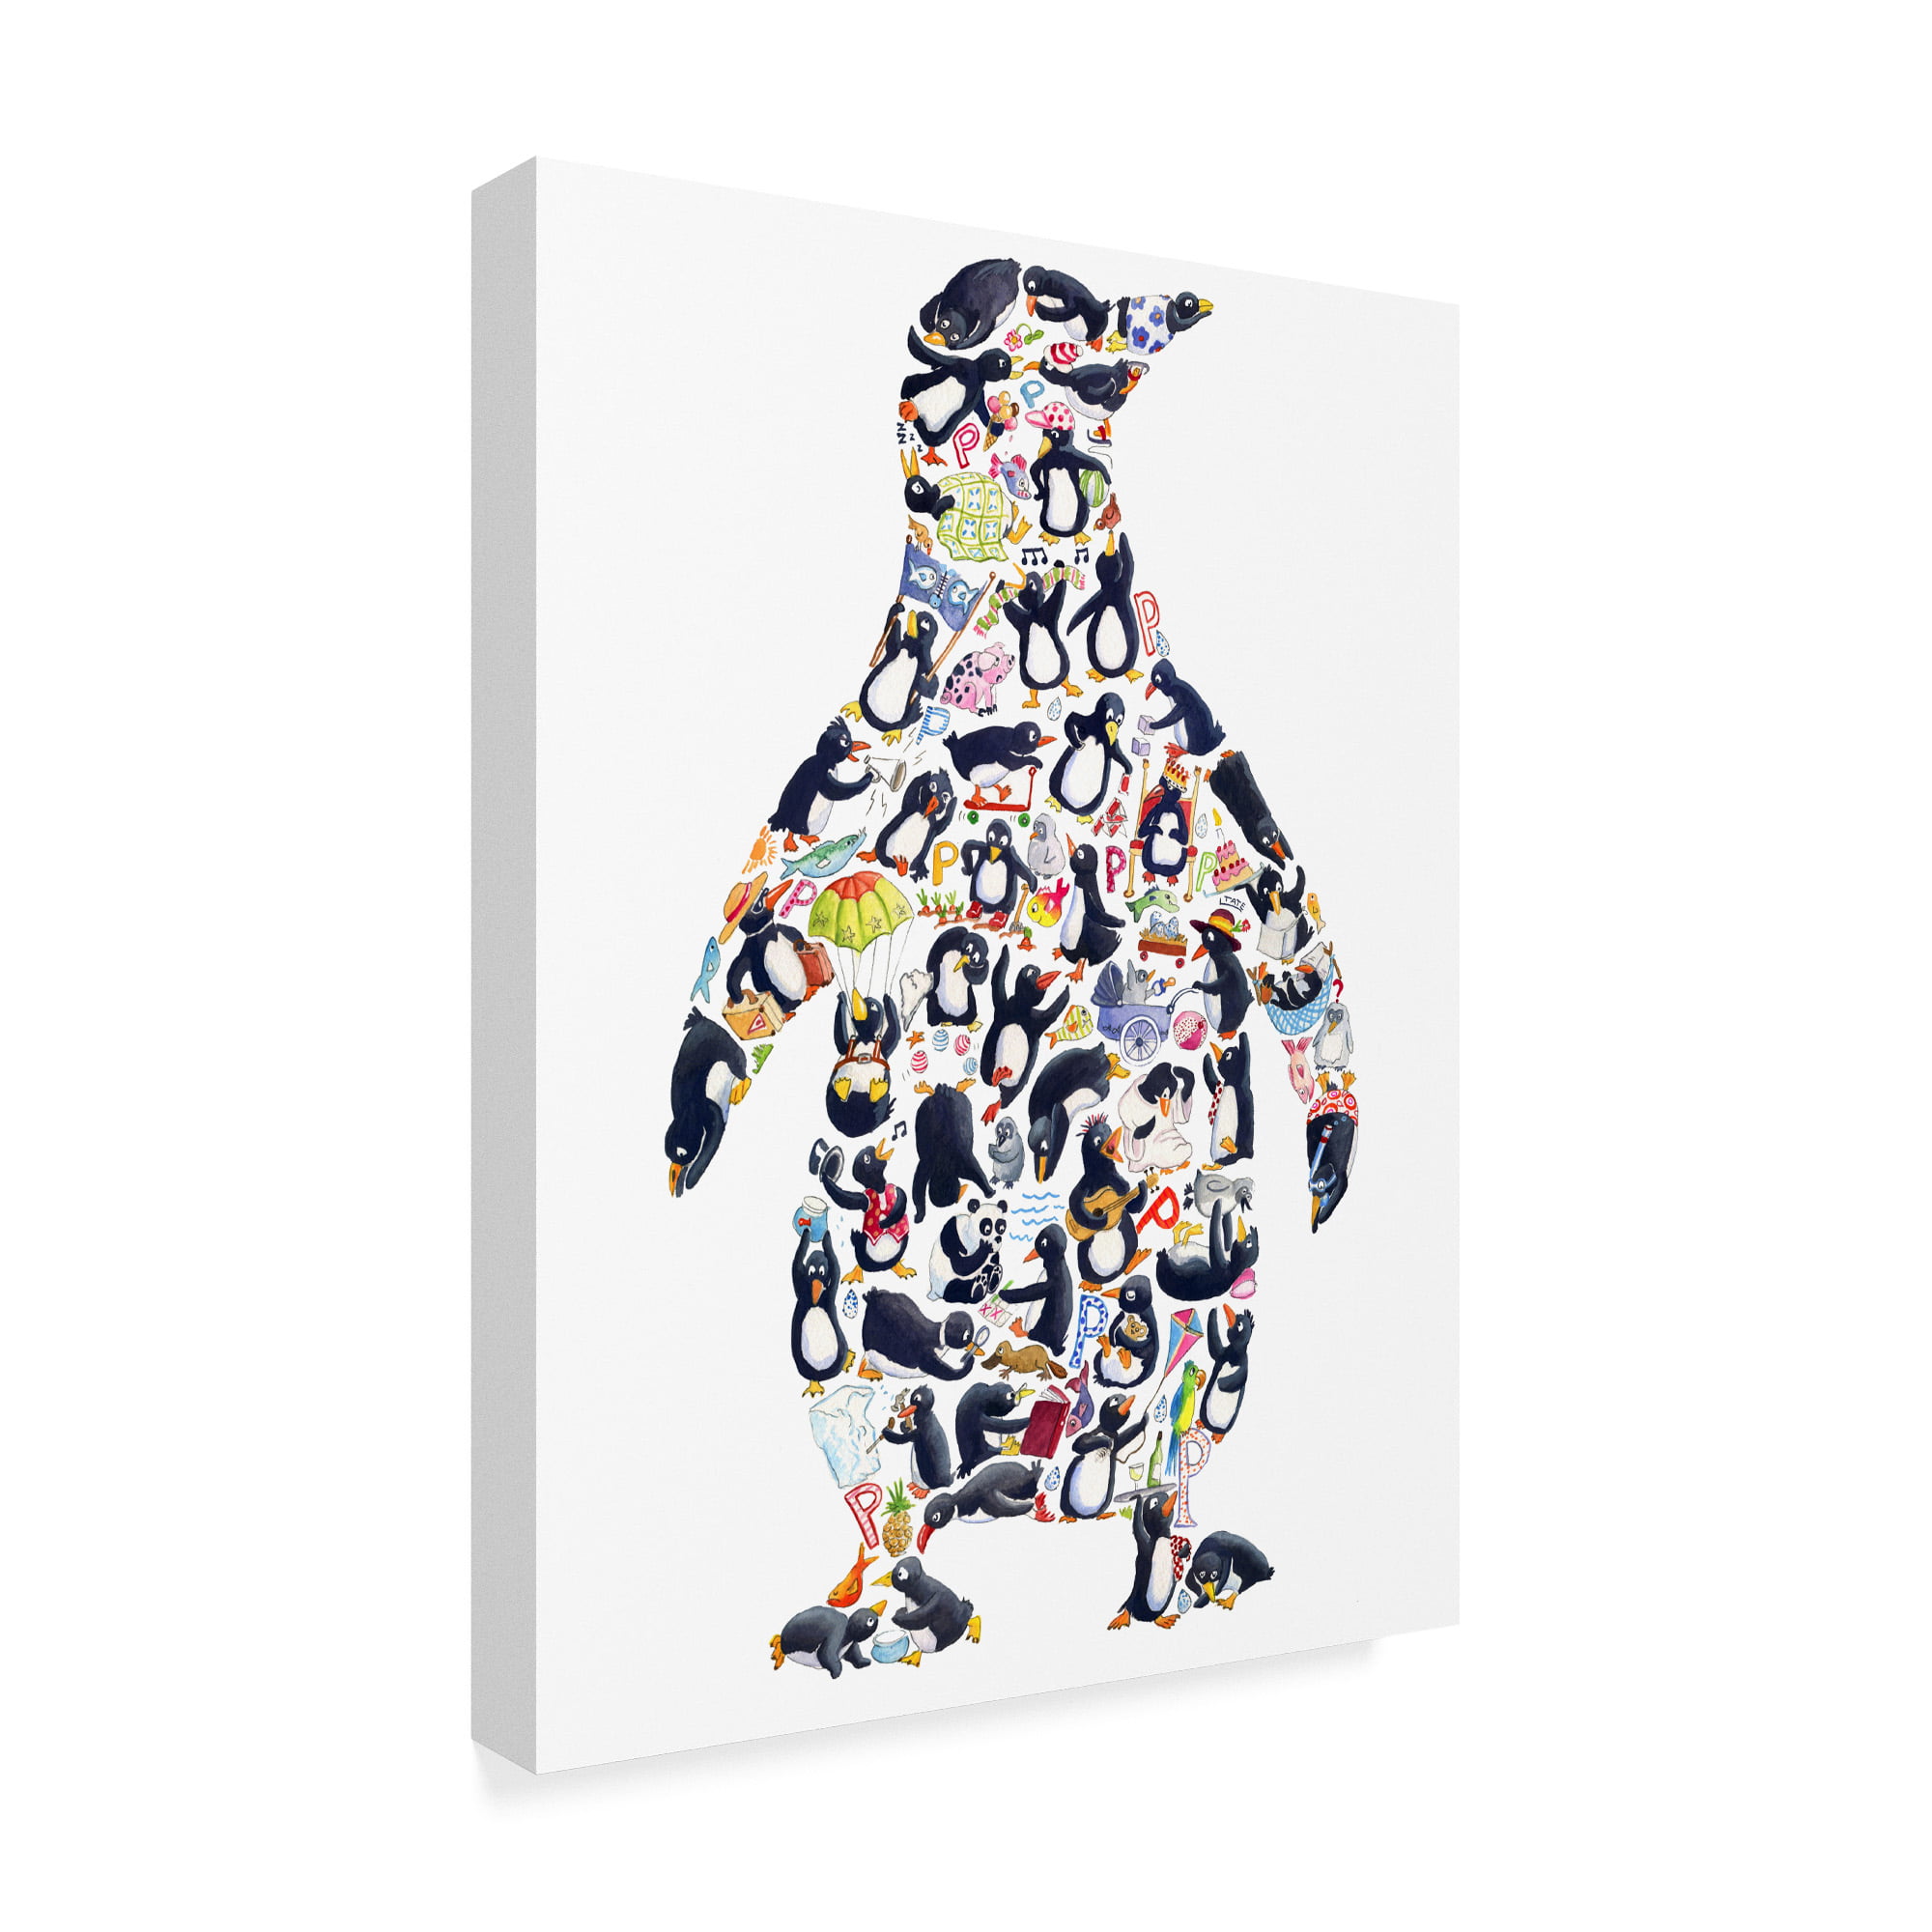 For the Love of Art London, Ontario - *** PAPER COLLAGE ART KIT - PENGUIN  *** Looking for a fun and creative project to do at home on your own, with  the